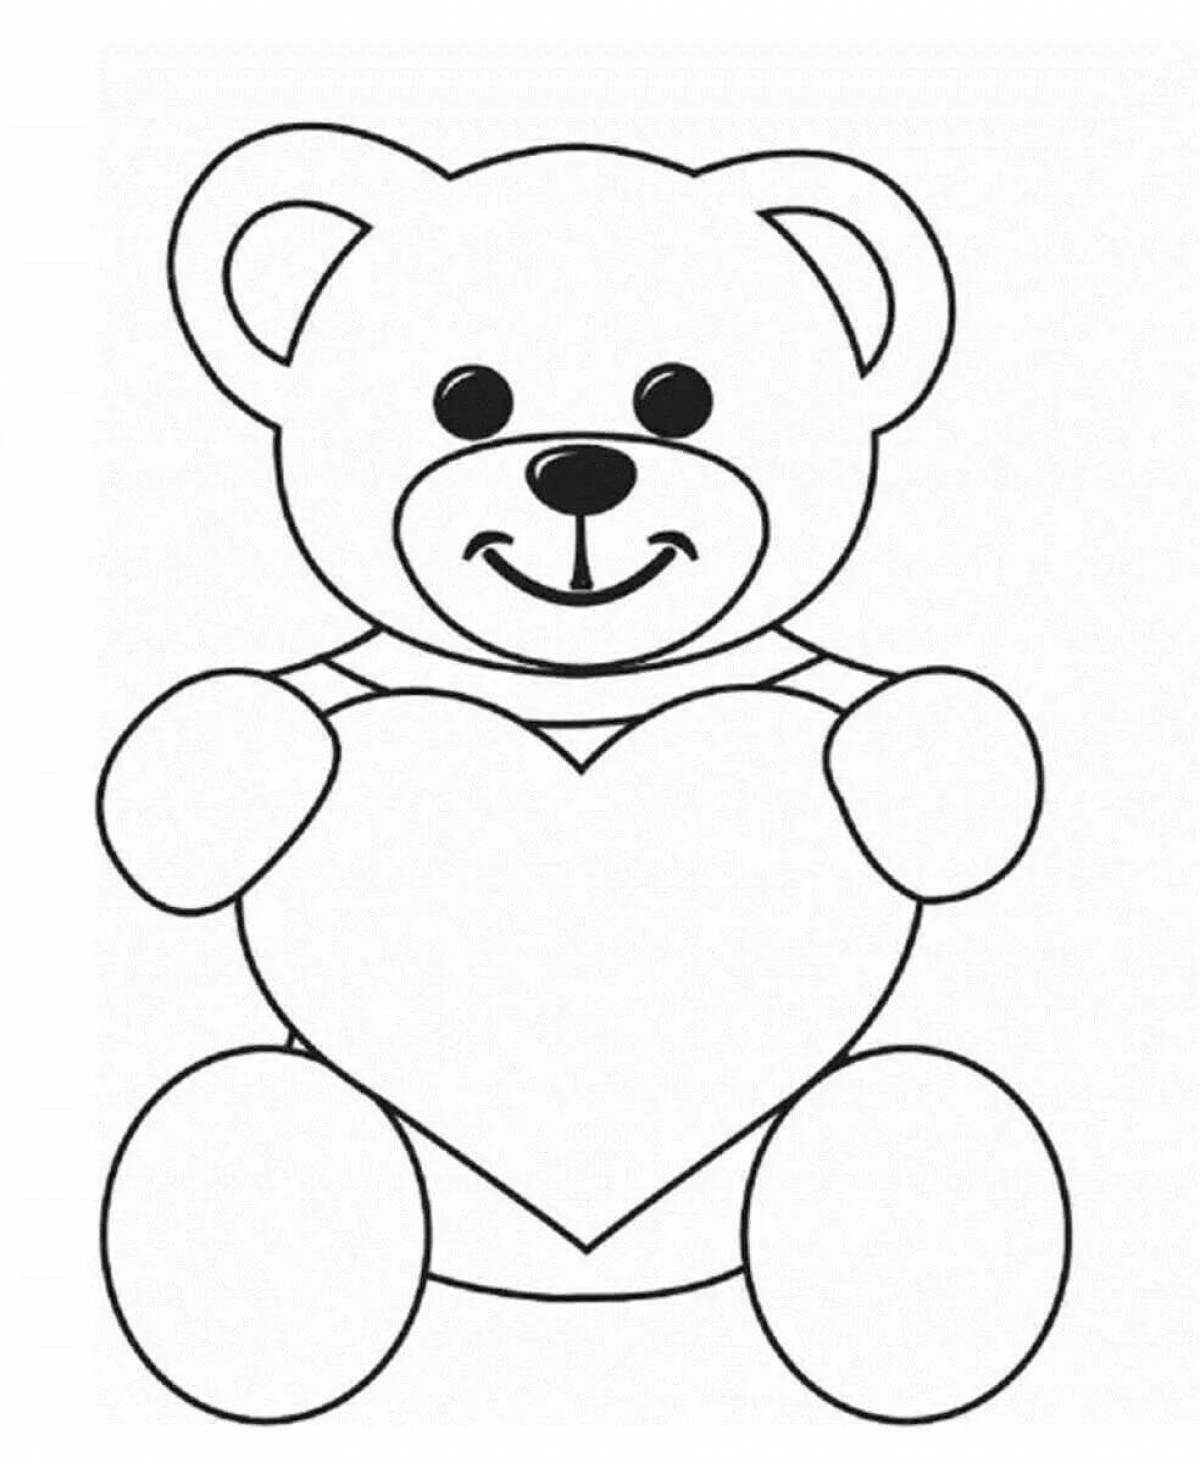 Coloring page loving teddy bear with heart